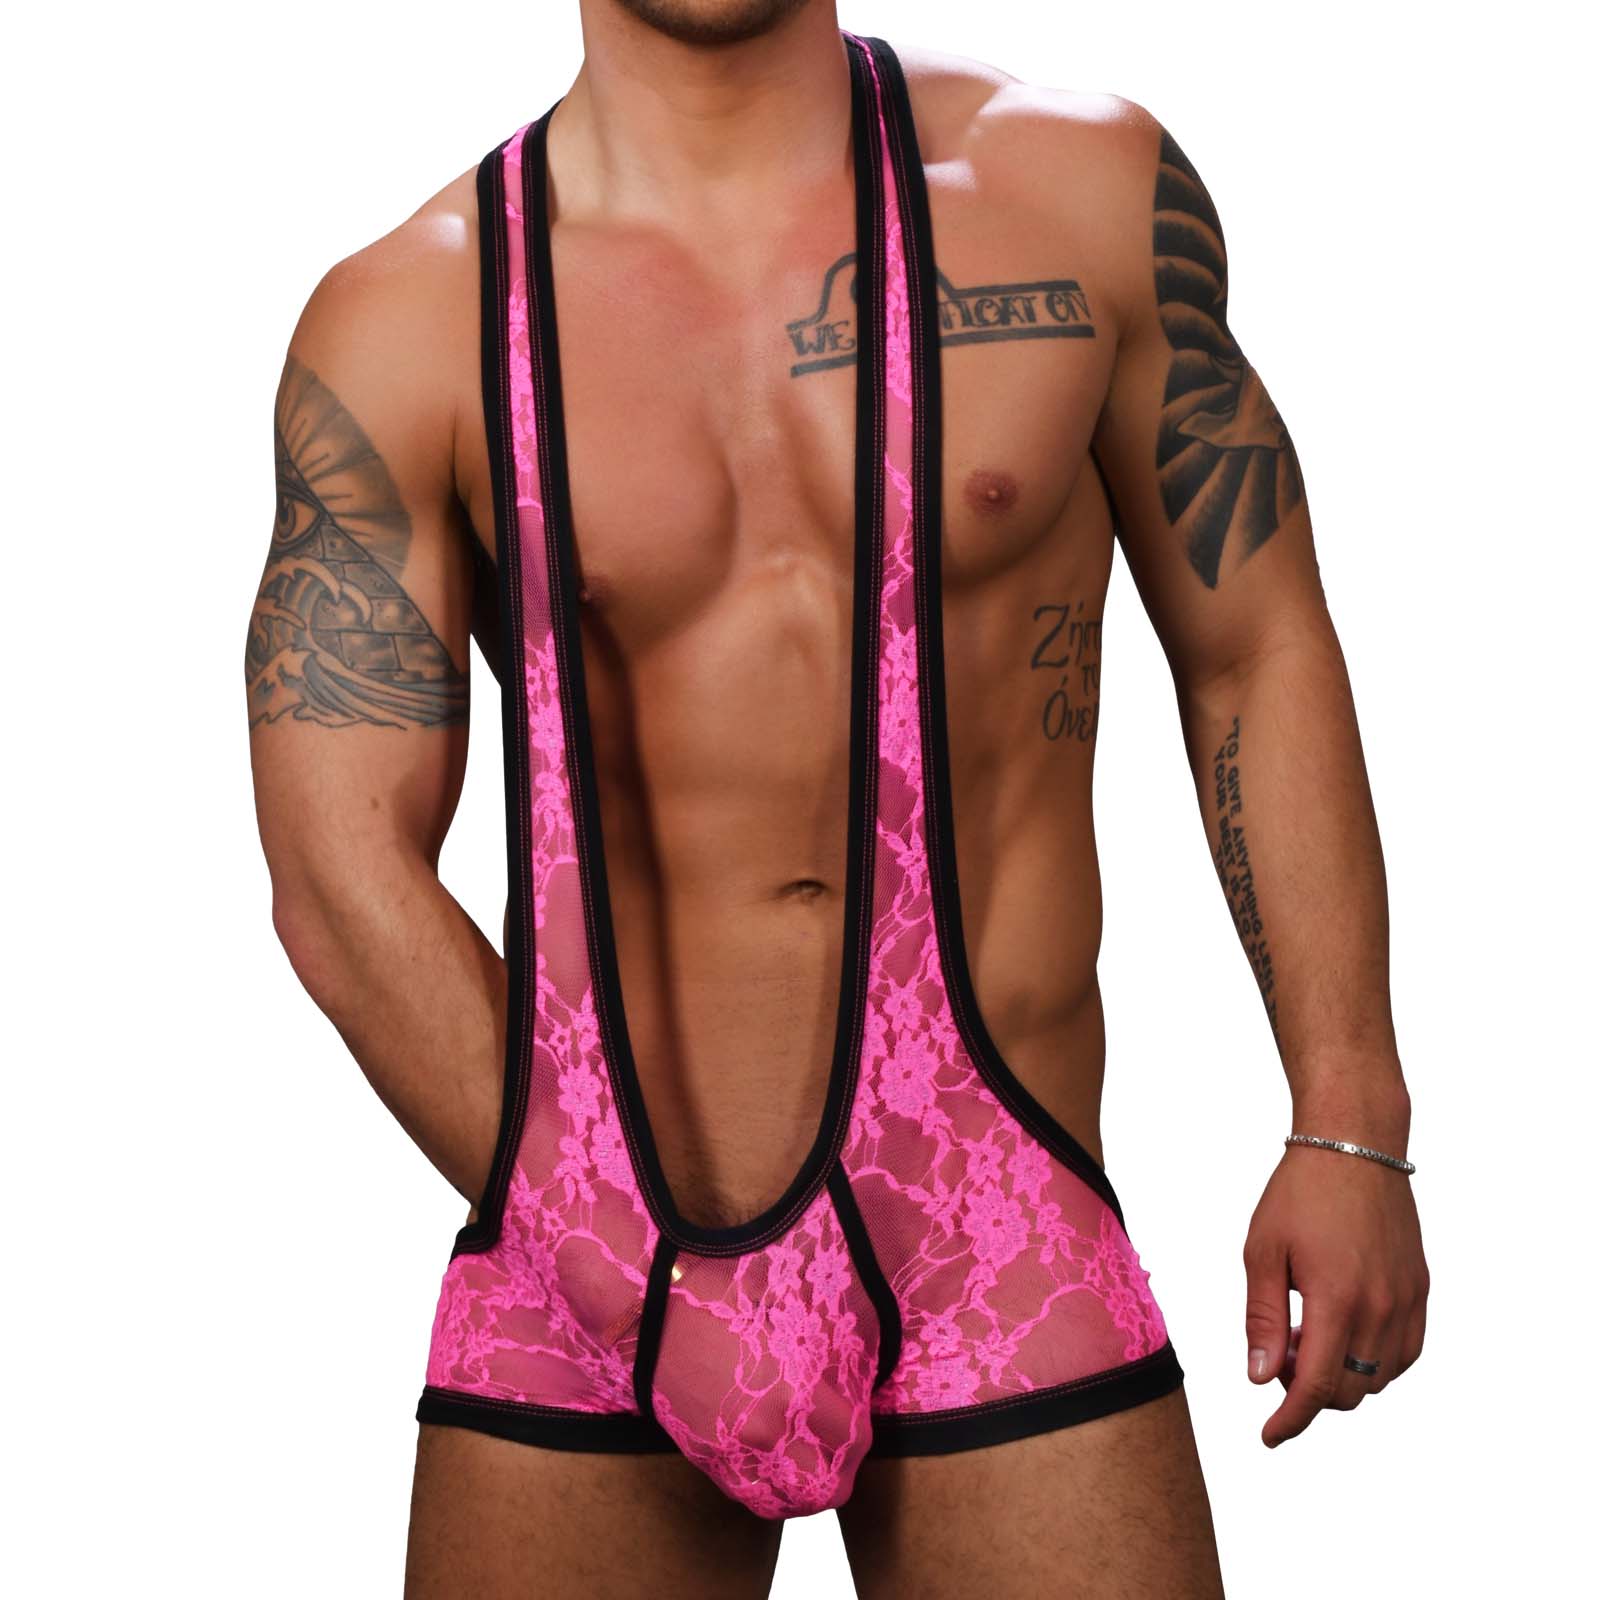 Body String Andrew Christian Shocking Lace 91282